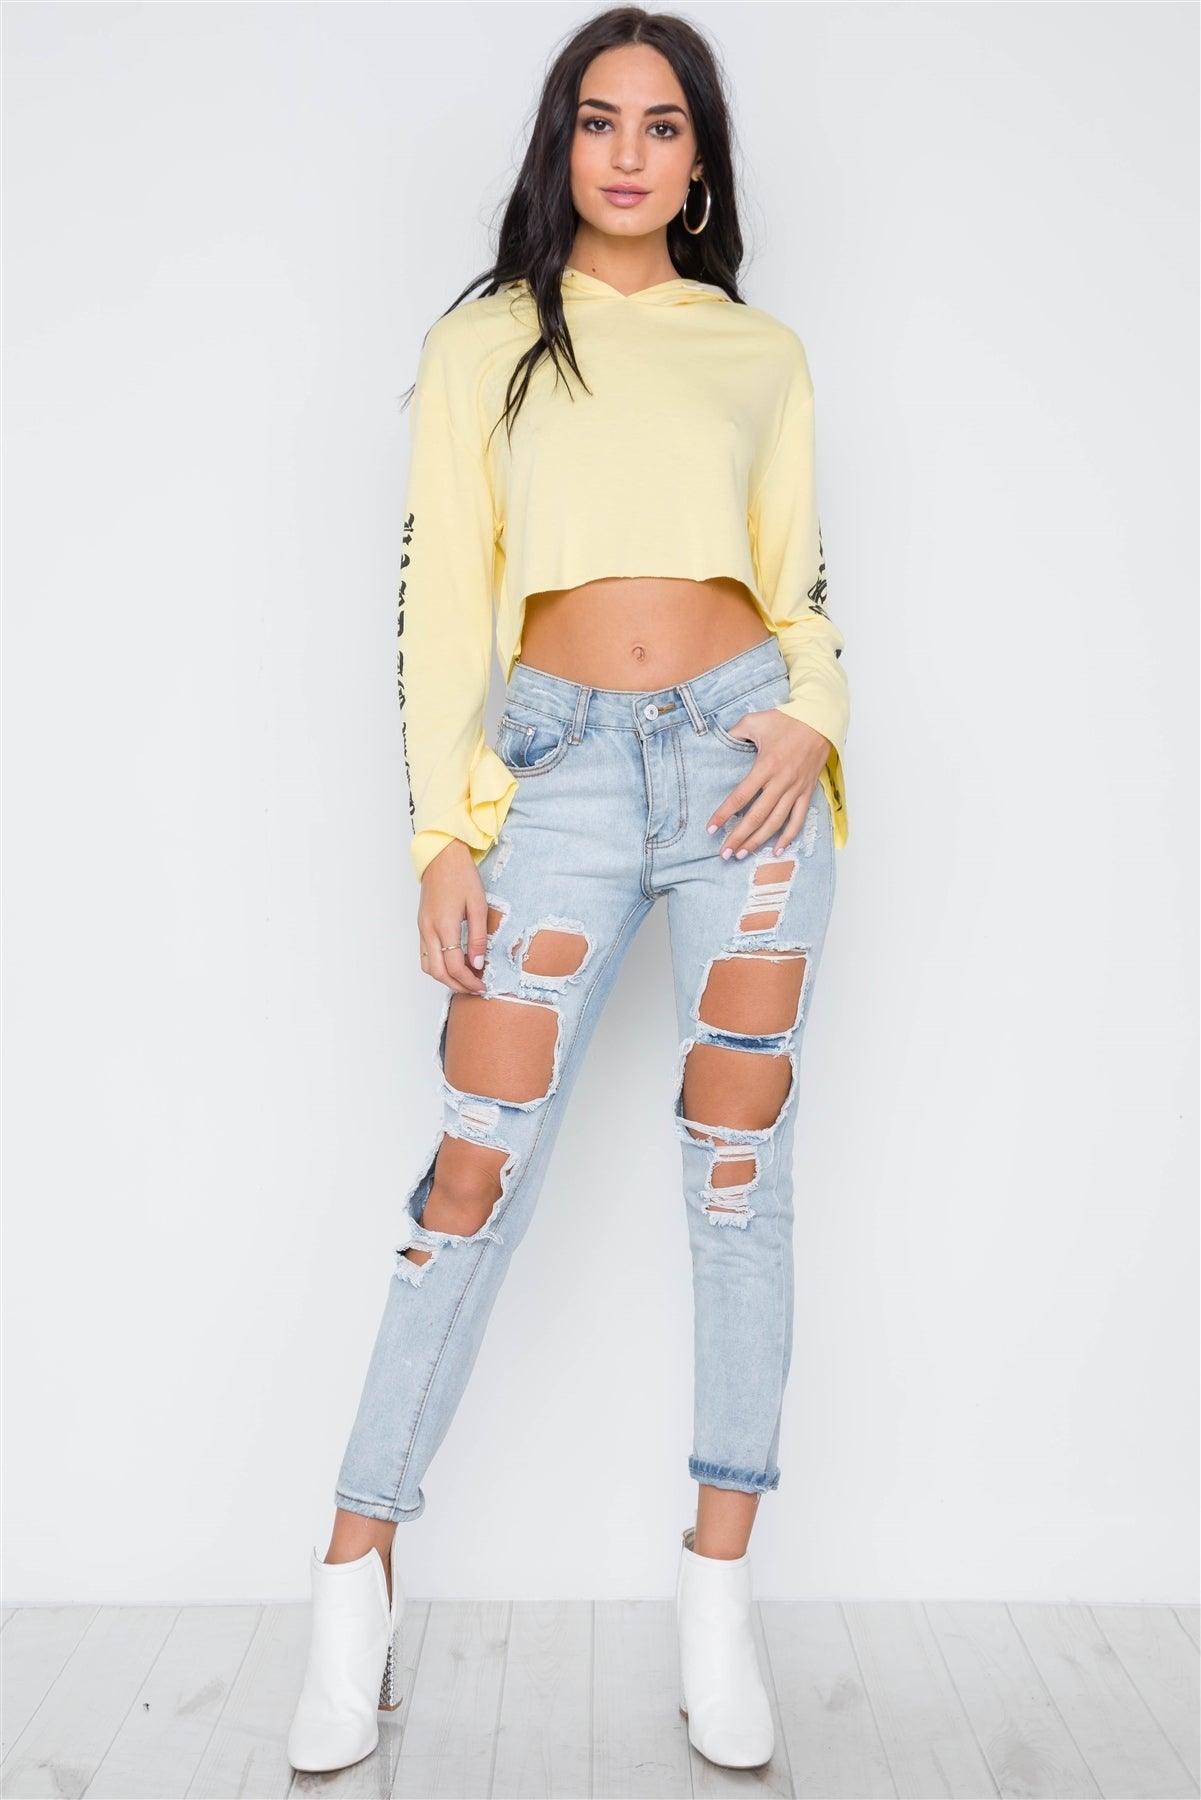 Yellow Graphic Print Long Sleeves Hooded Crop Top /3-2-2